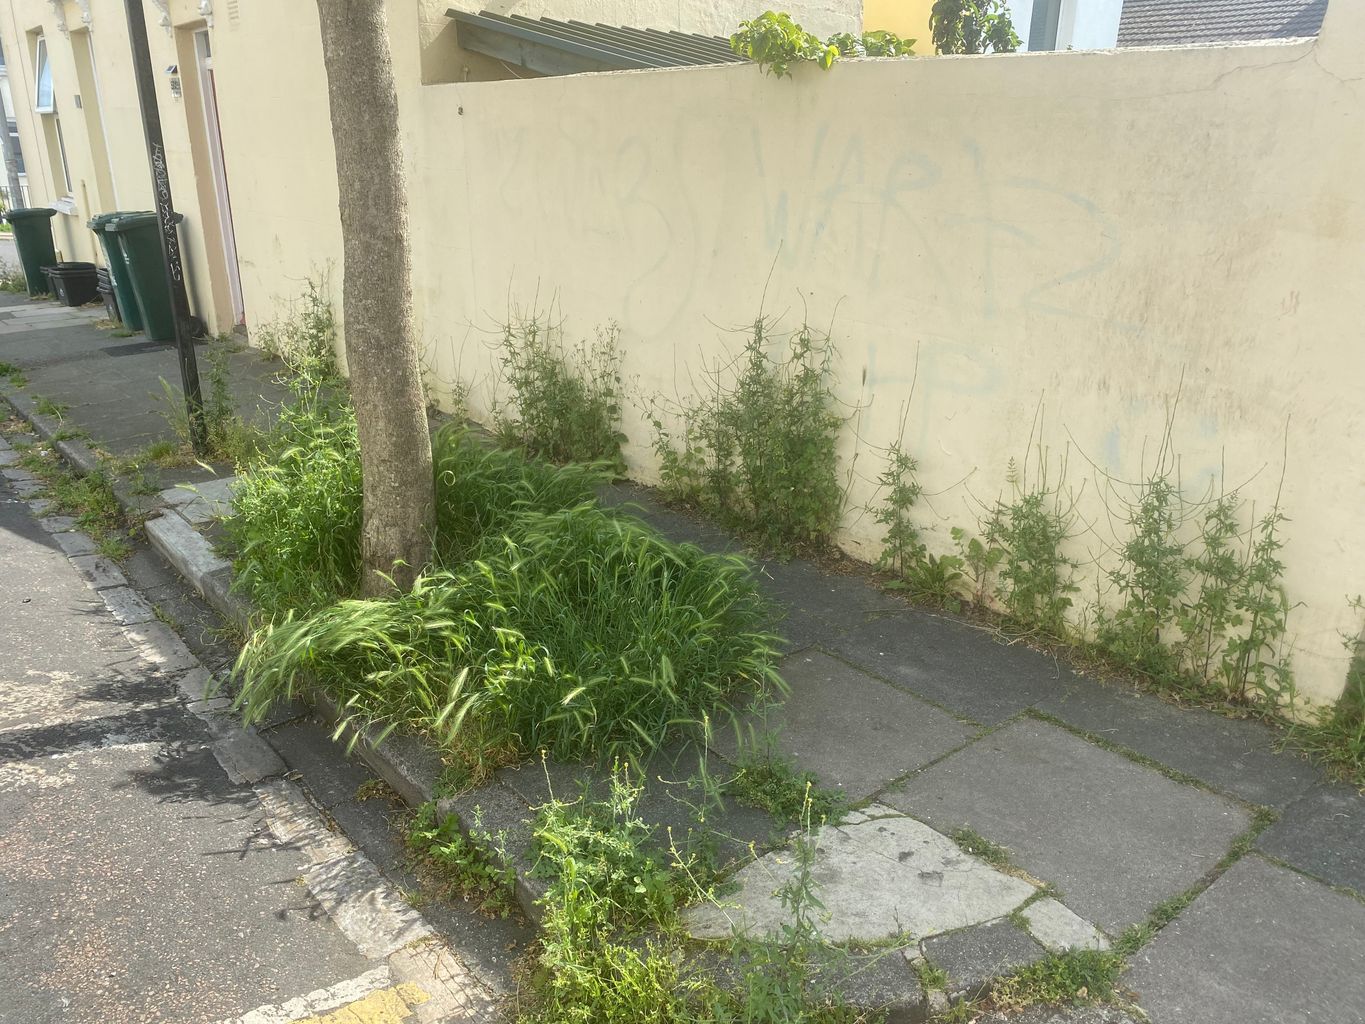 Weeds costing council millions in repairs after damage to pavements across Brighton